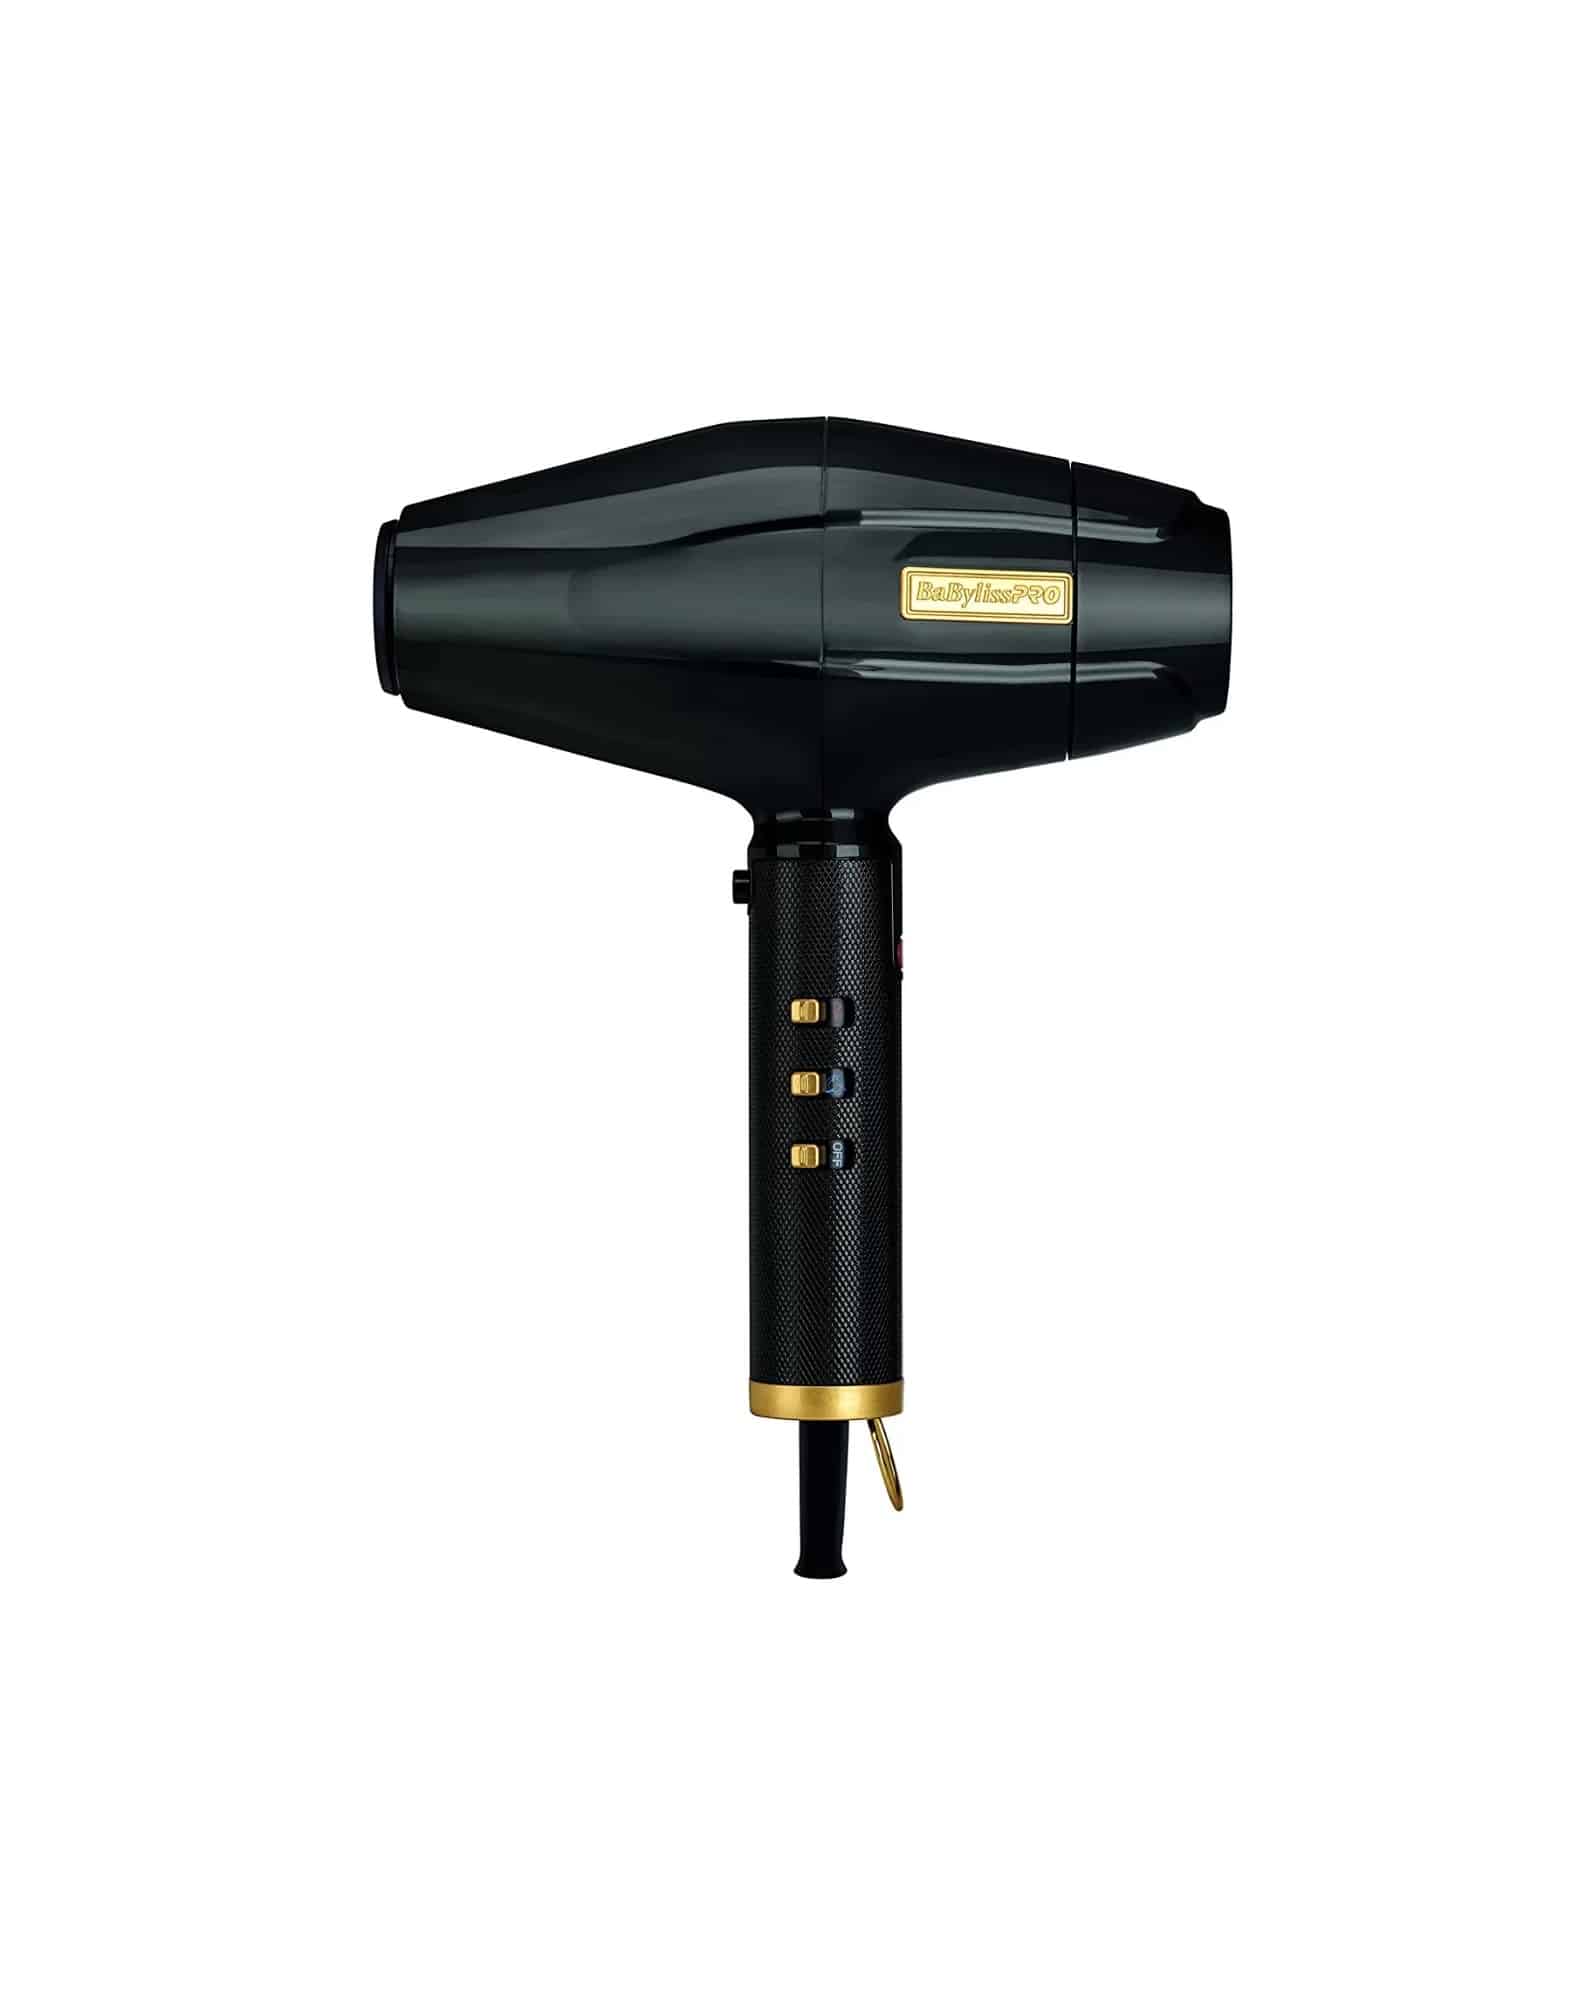 Shop BaByliss PRO Hair Dryers & Electricals